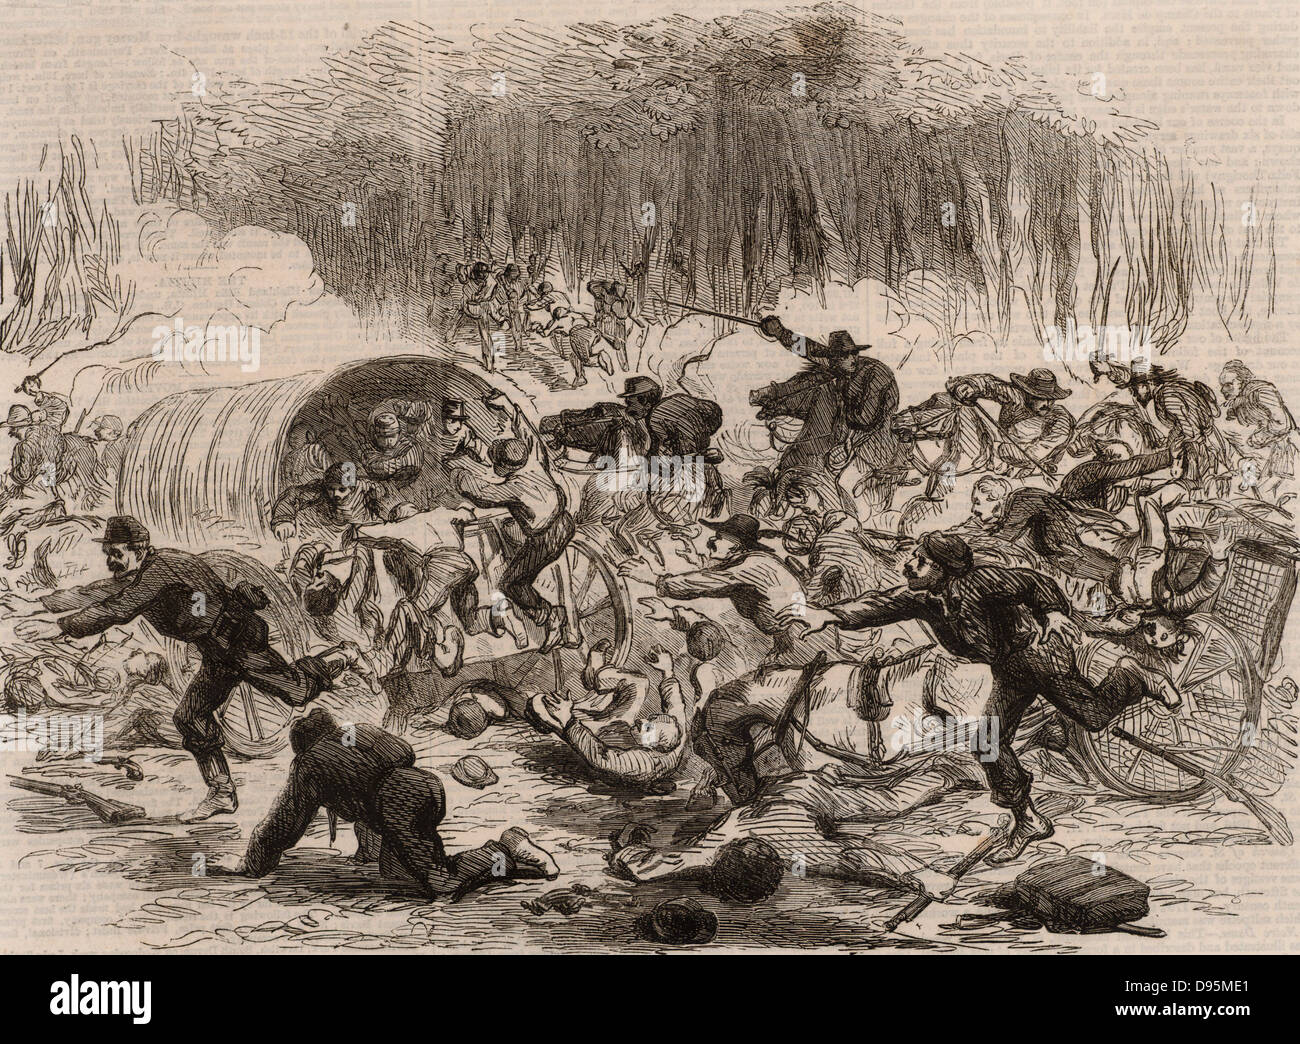 American Civil War 1861-1865. First Battle of Bull Run (Manassas, Virginia). Defeat and stampede of the Union troops, 21 July 1861. From 'The Illustrated London News' (London, 1861). Engraving. Stock Photo